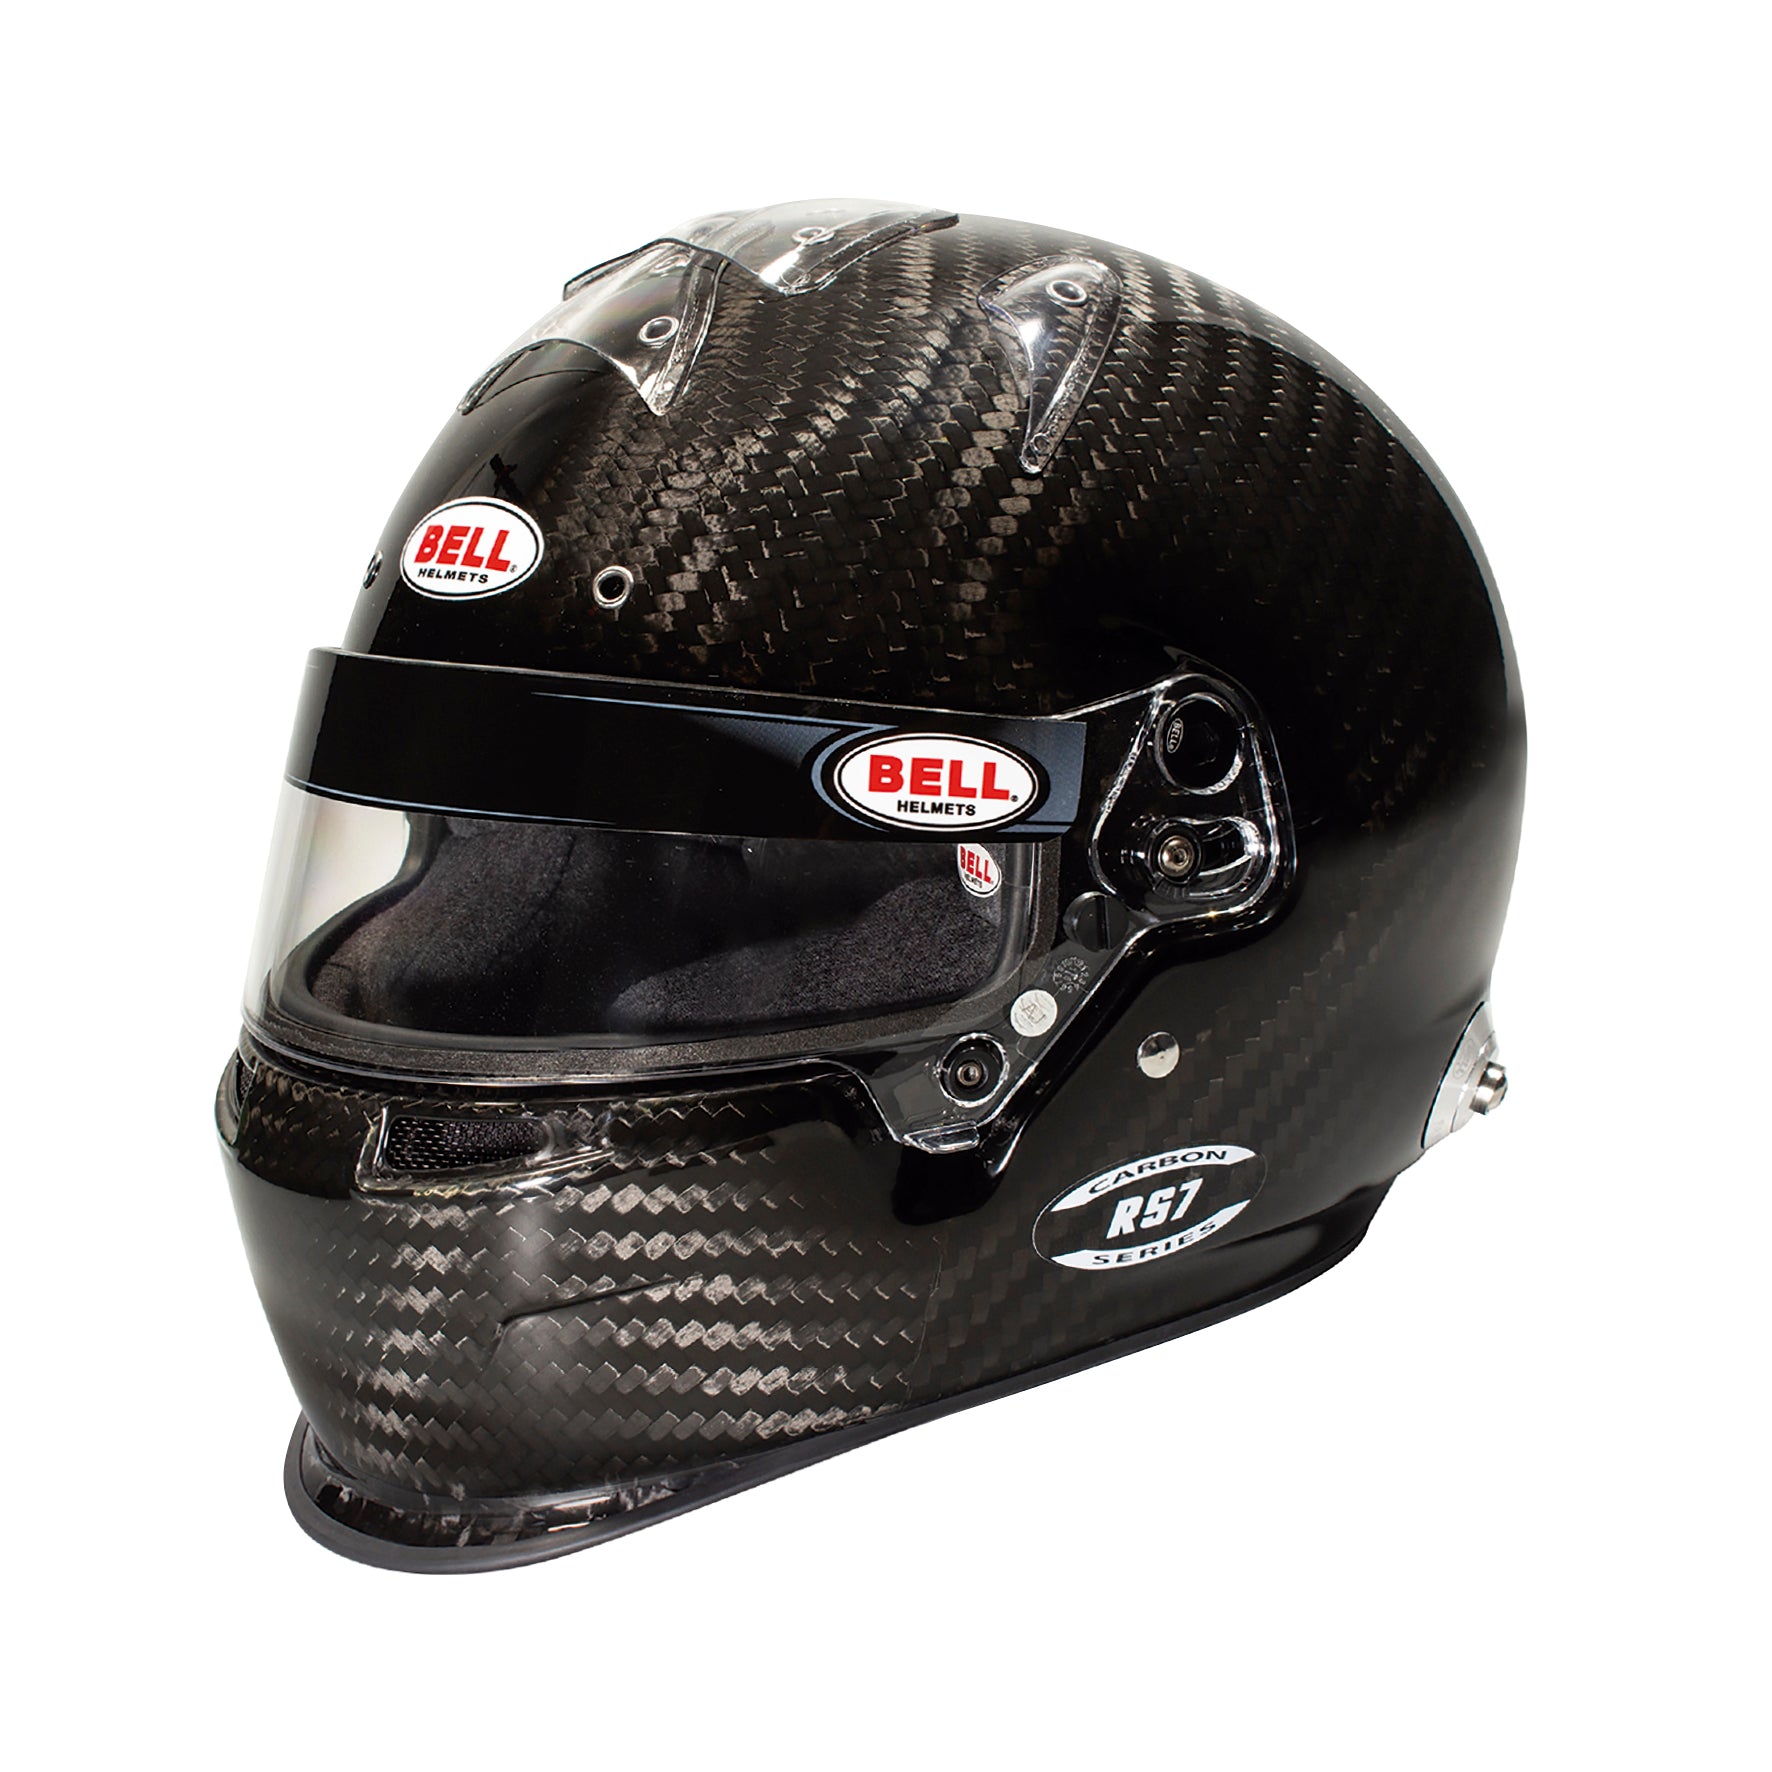 BELL 1204A01 Шолом full face RS7 CARBON DUCKBILL, HANS, FIA, size 54 (6 3/4) Photo-1 